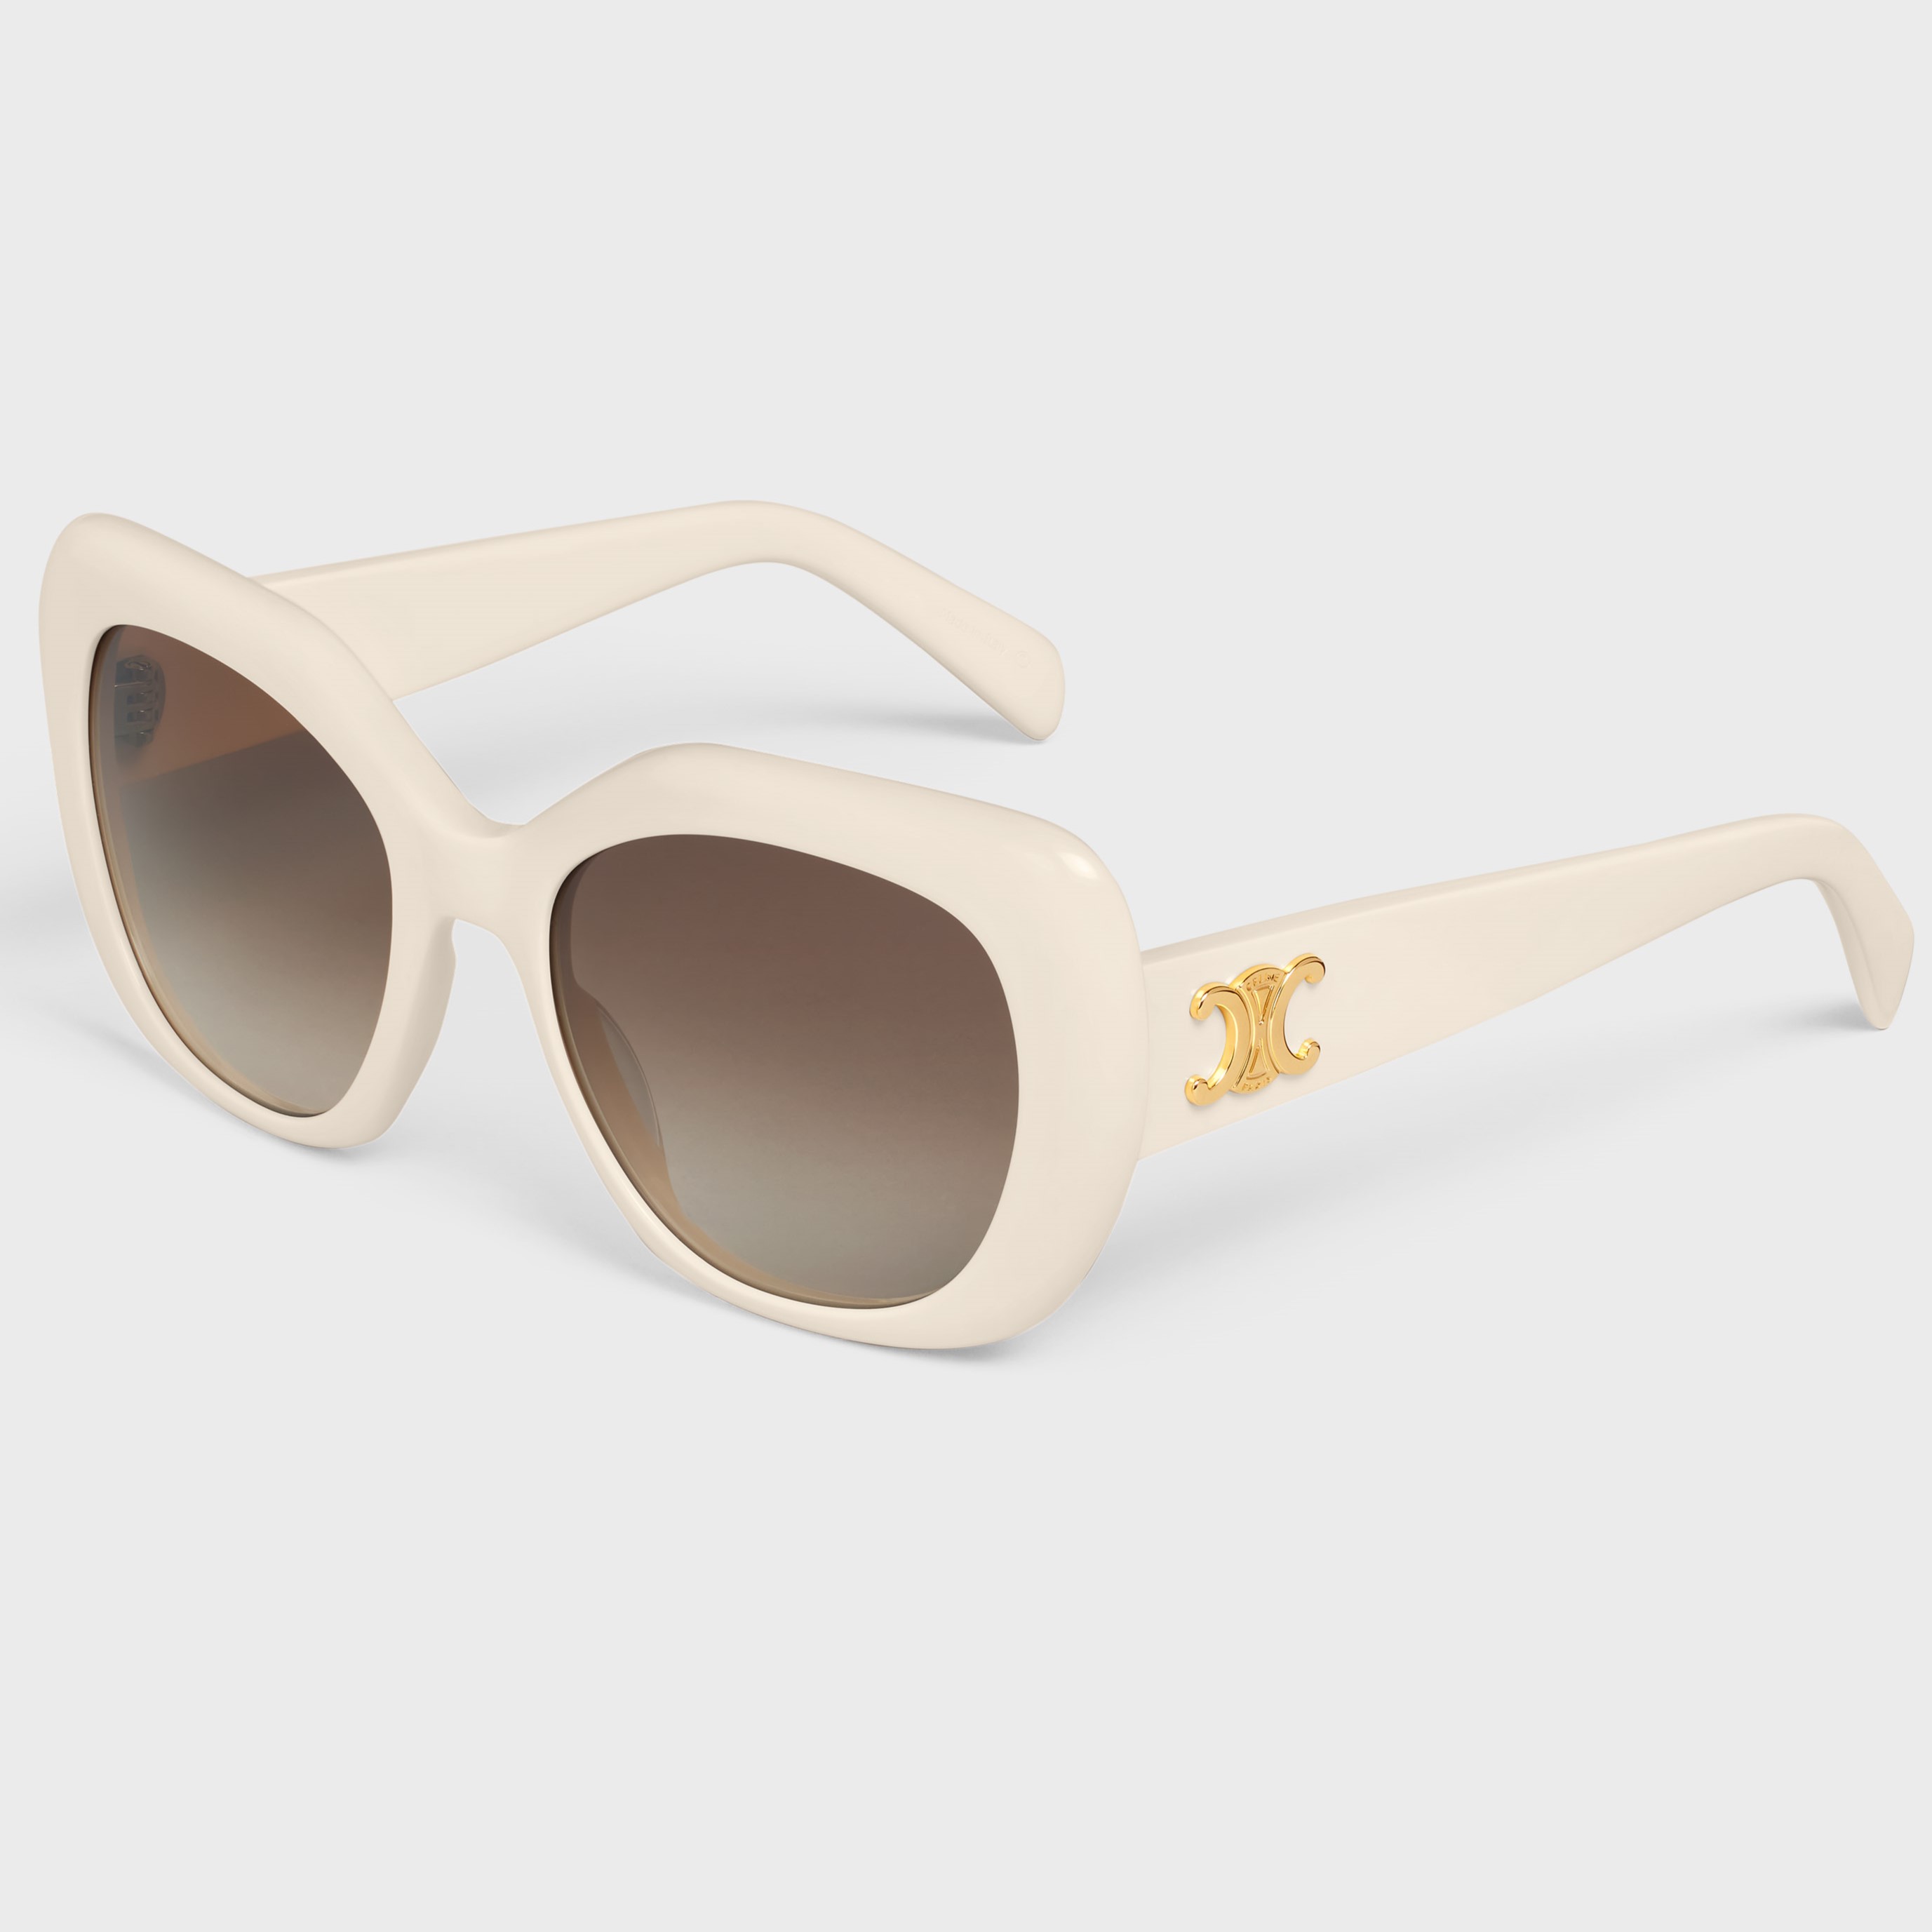 MẮT KÍNH NỮ CELINE TRIOMPHE 06 SUNGLASSES IN IVORY SQUARE ACETATE 9